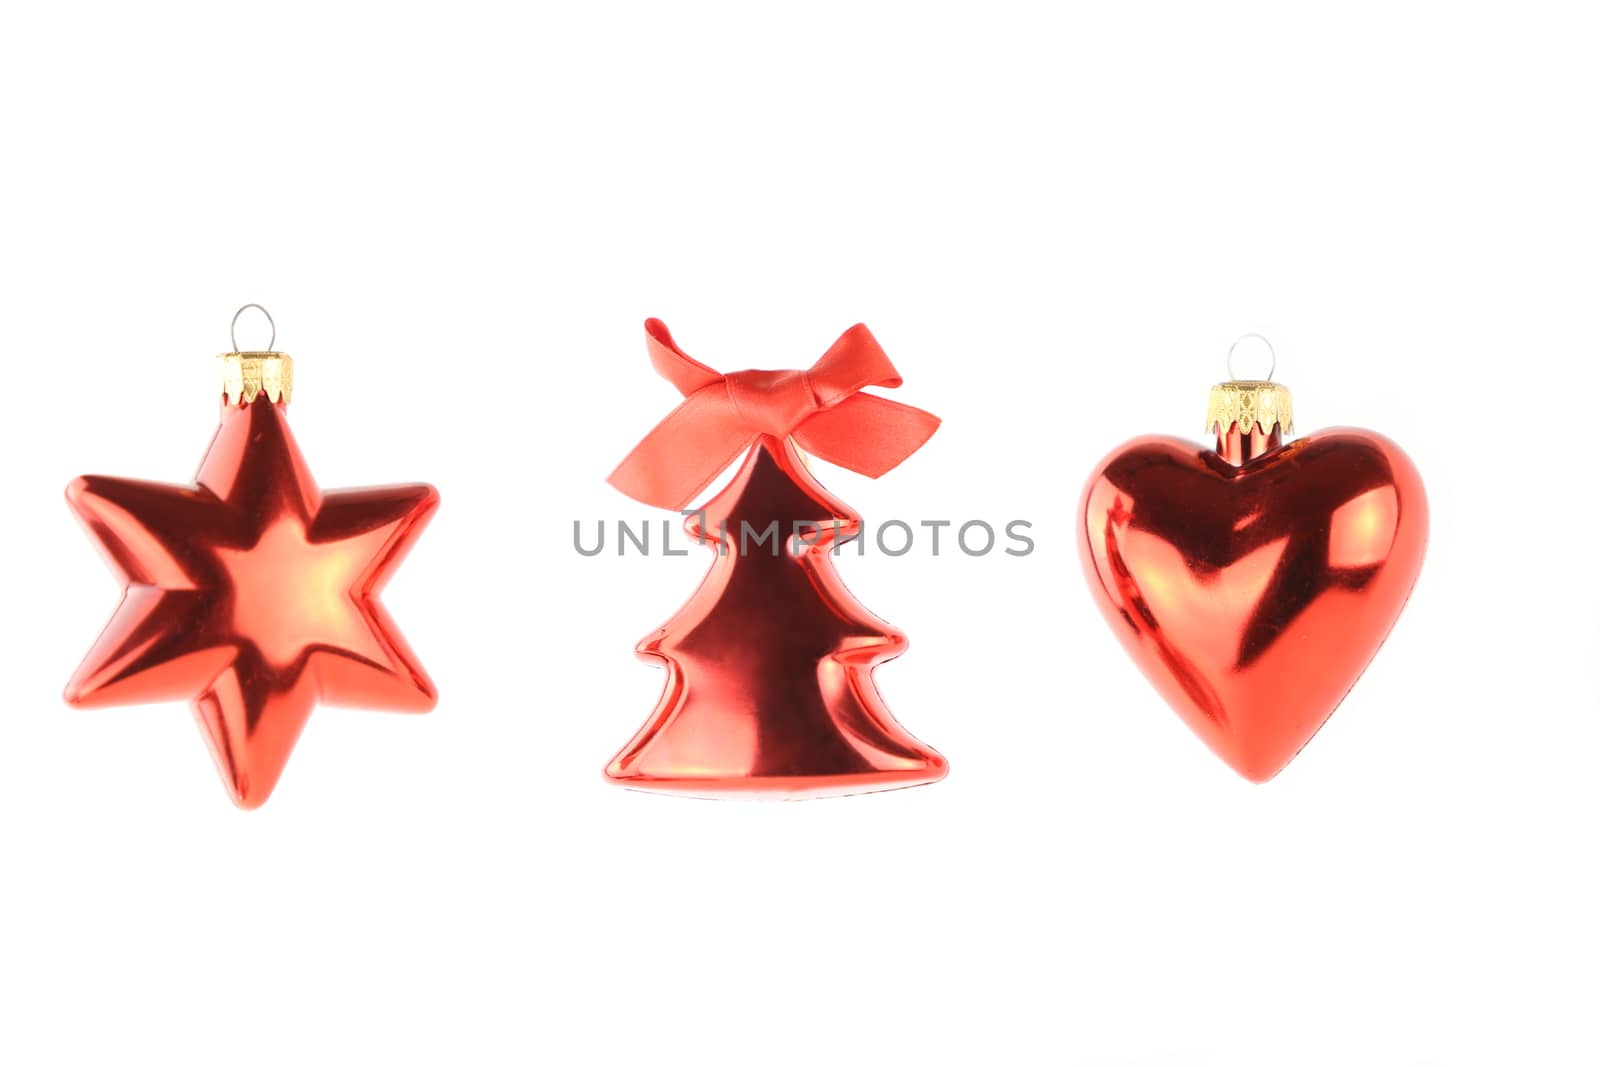 Three hanging red Christmas balls isolated having different shapes: star, heart and tree on white background by robbyfontanesi